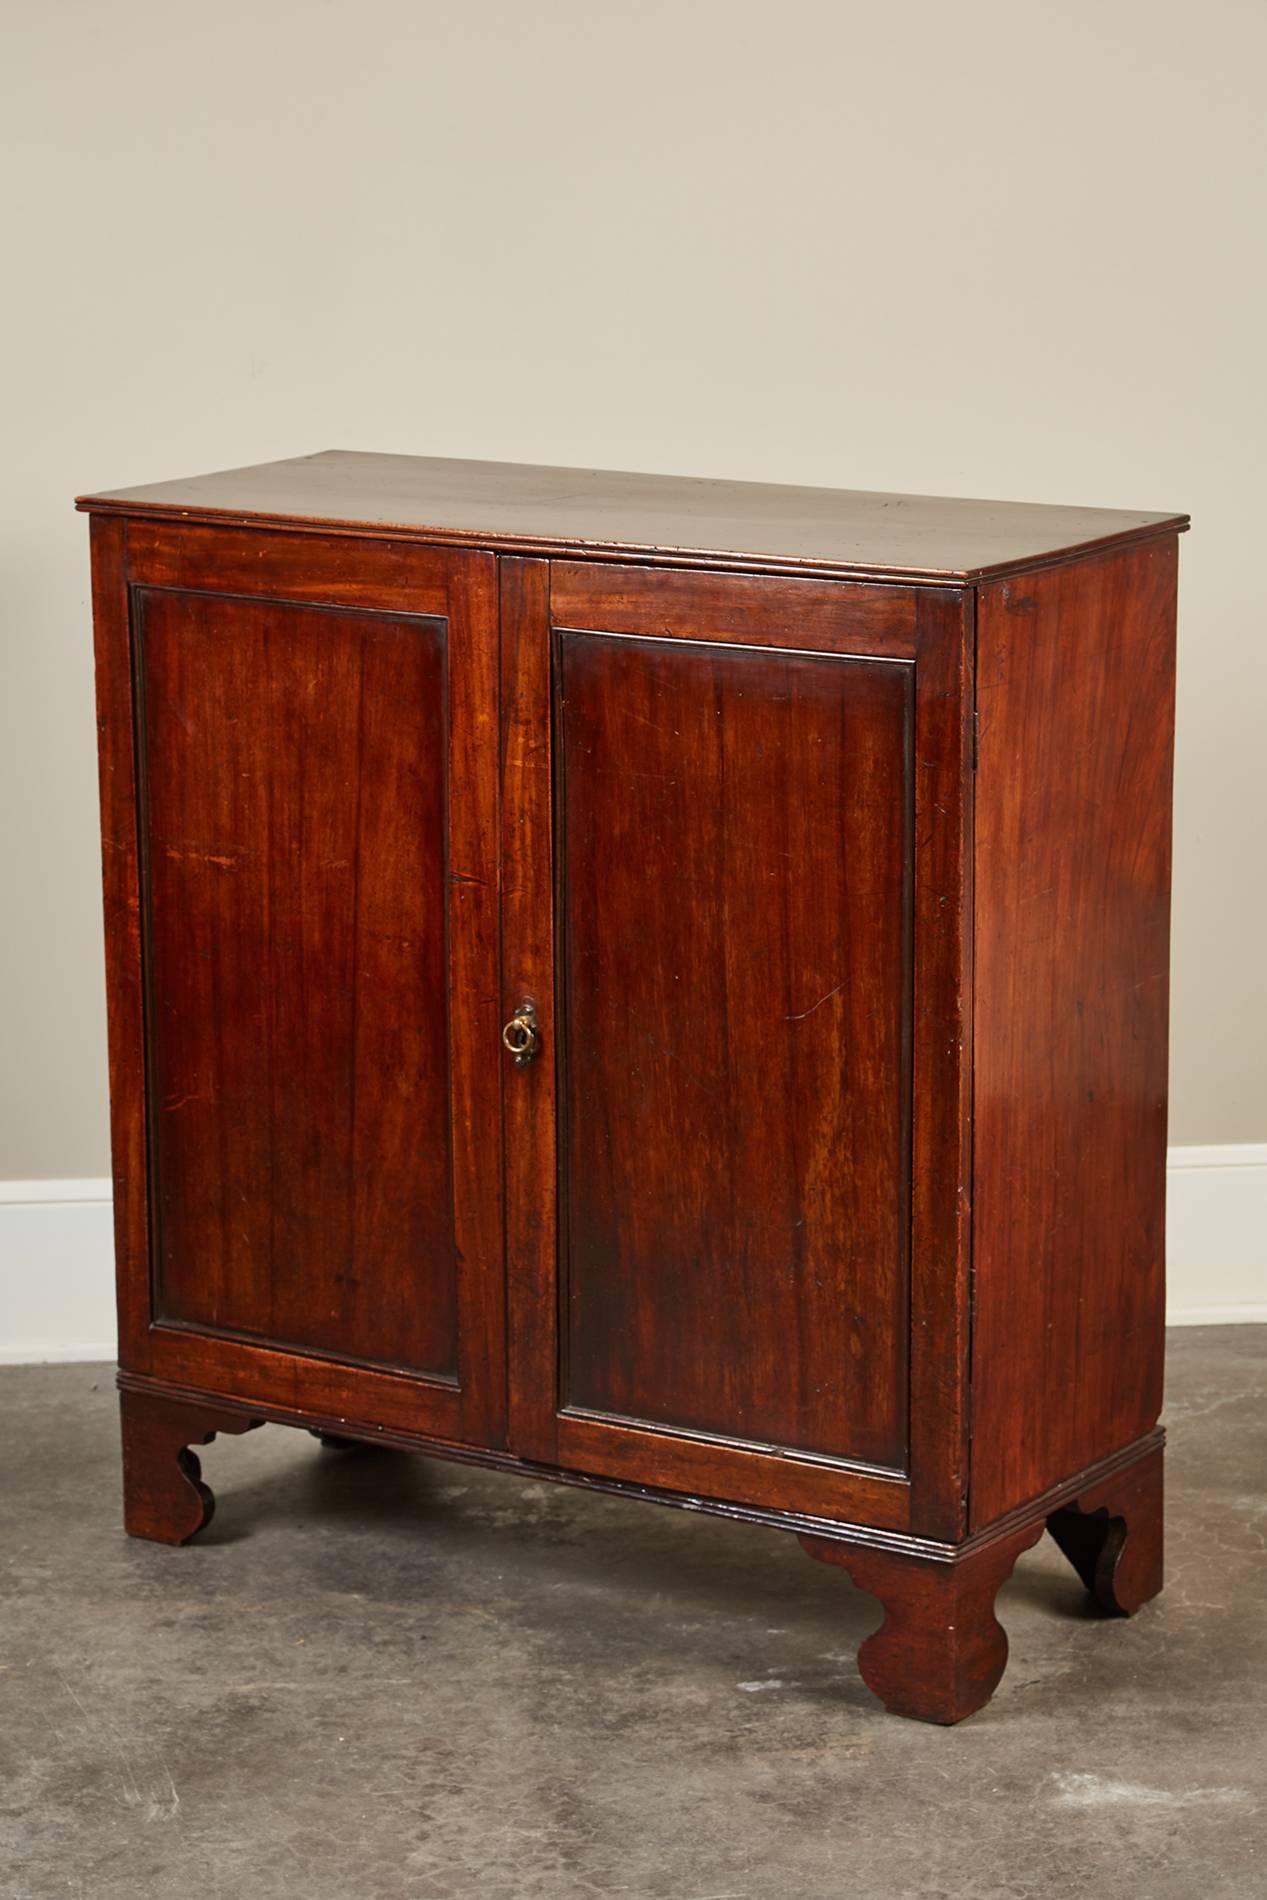 A unusual Georgian two-door side cabinet. The two solid doors open to reveal a compartment with four removable drawer trays.